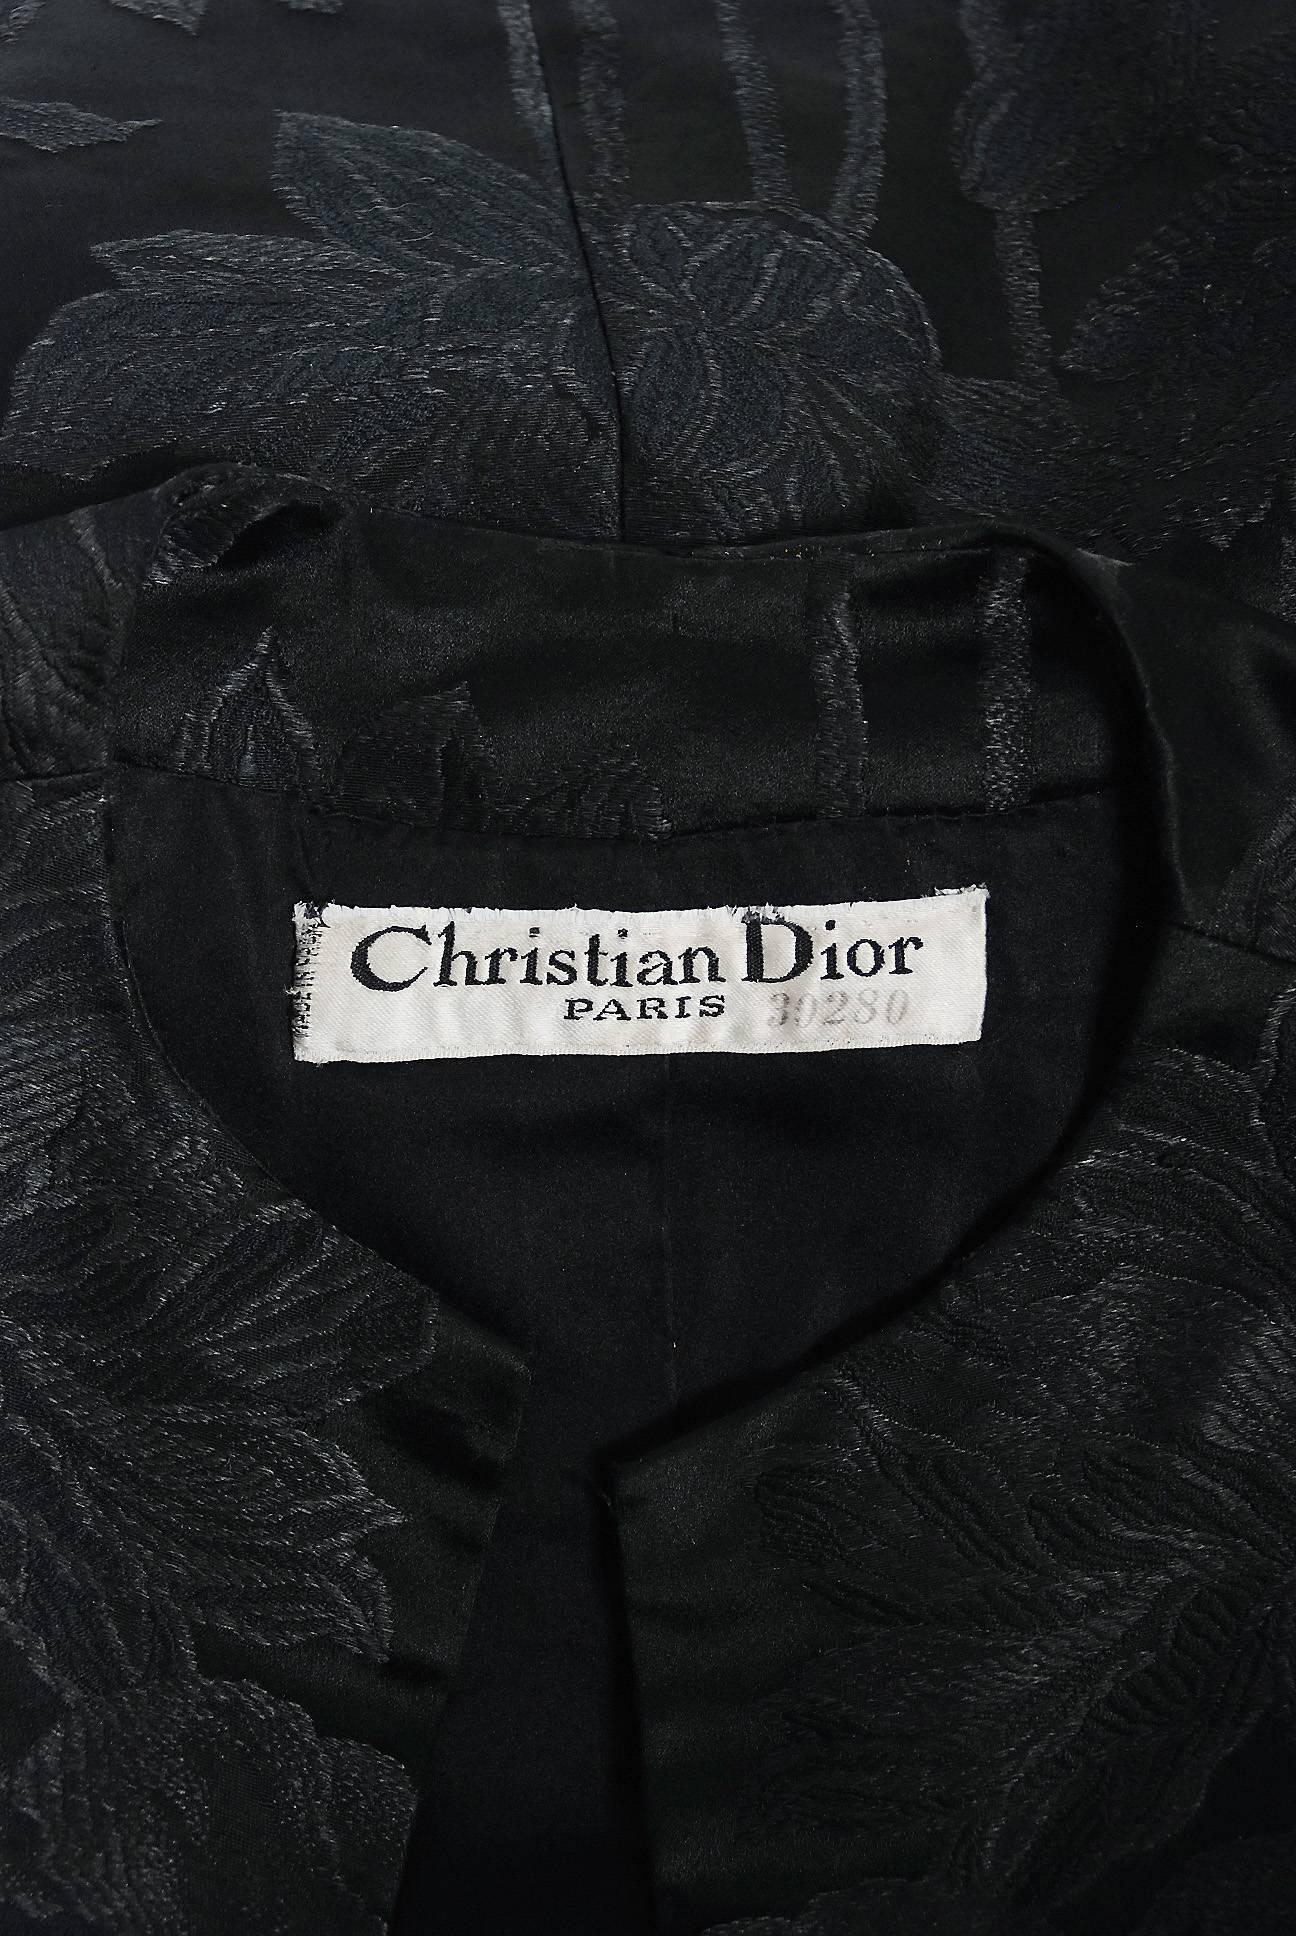 Vintage 1953 Christian Dior Haute-Couture Floral Silk Brocade Winged Jacket 1